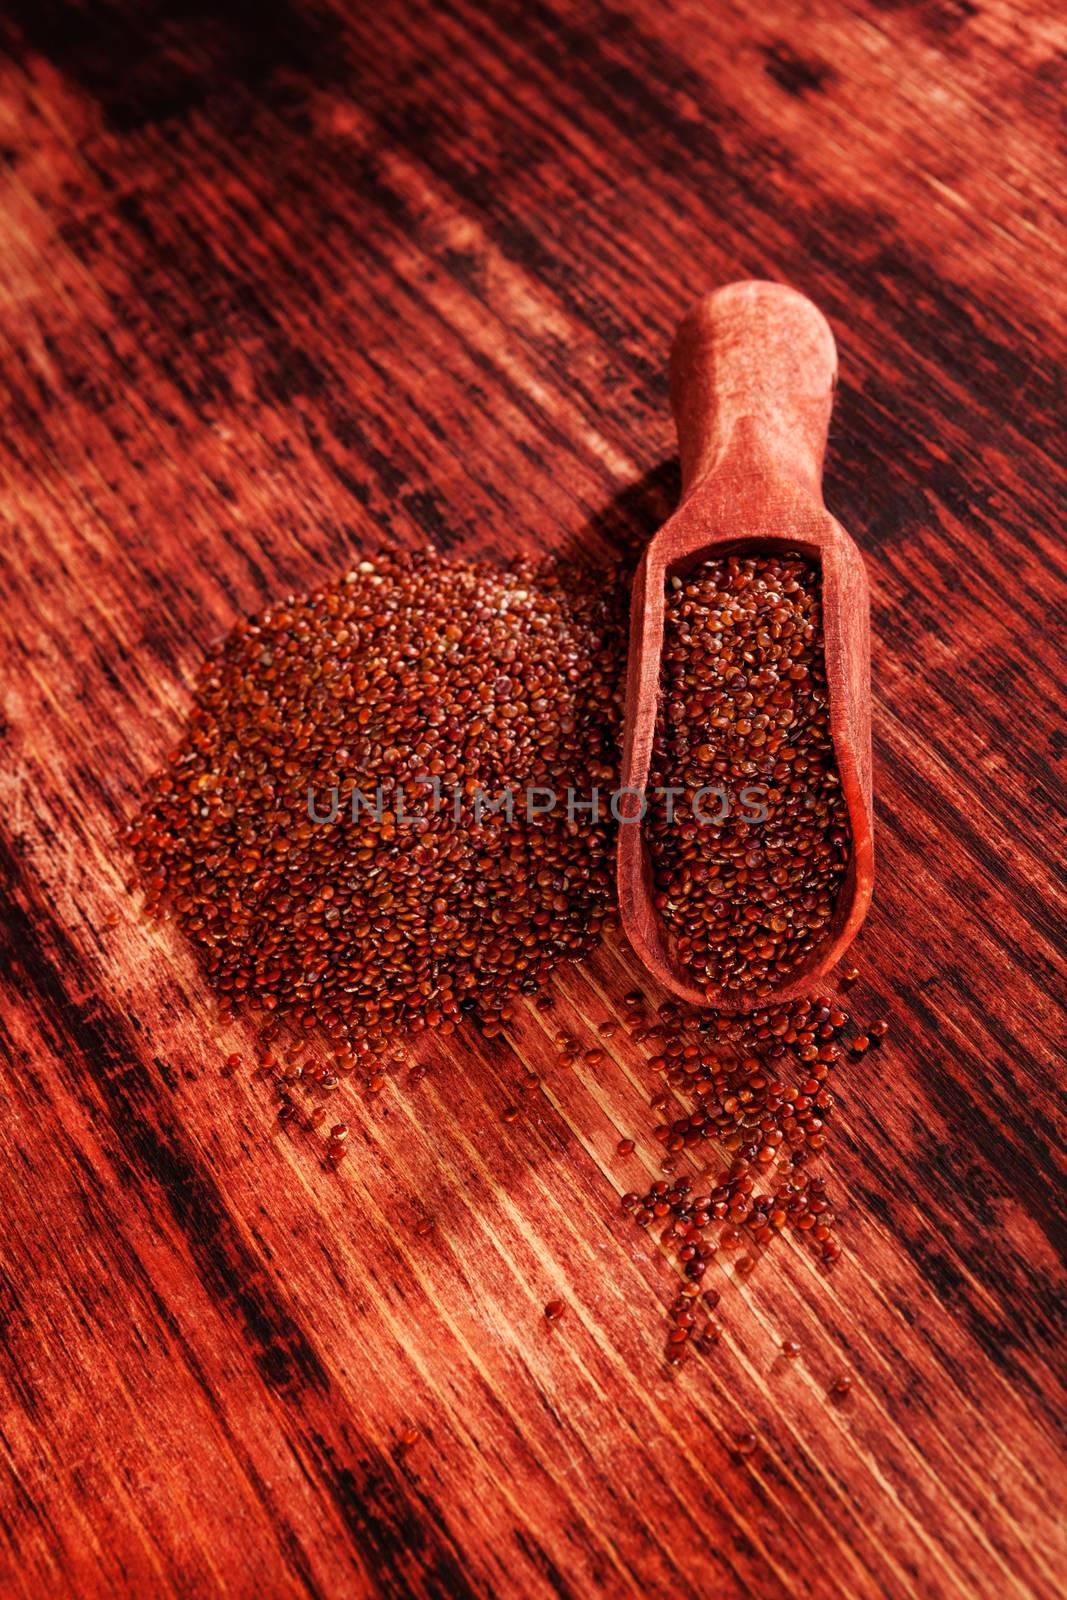 Red quinoa seeds on brown wooden table. Healthy eating.